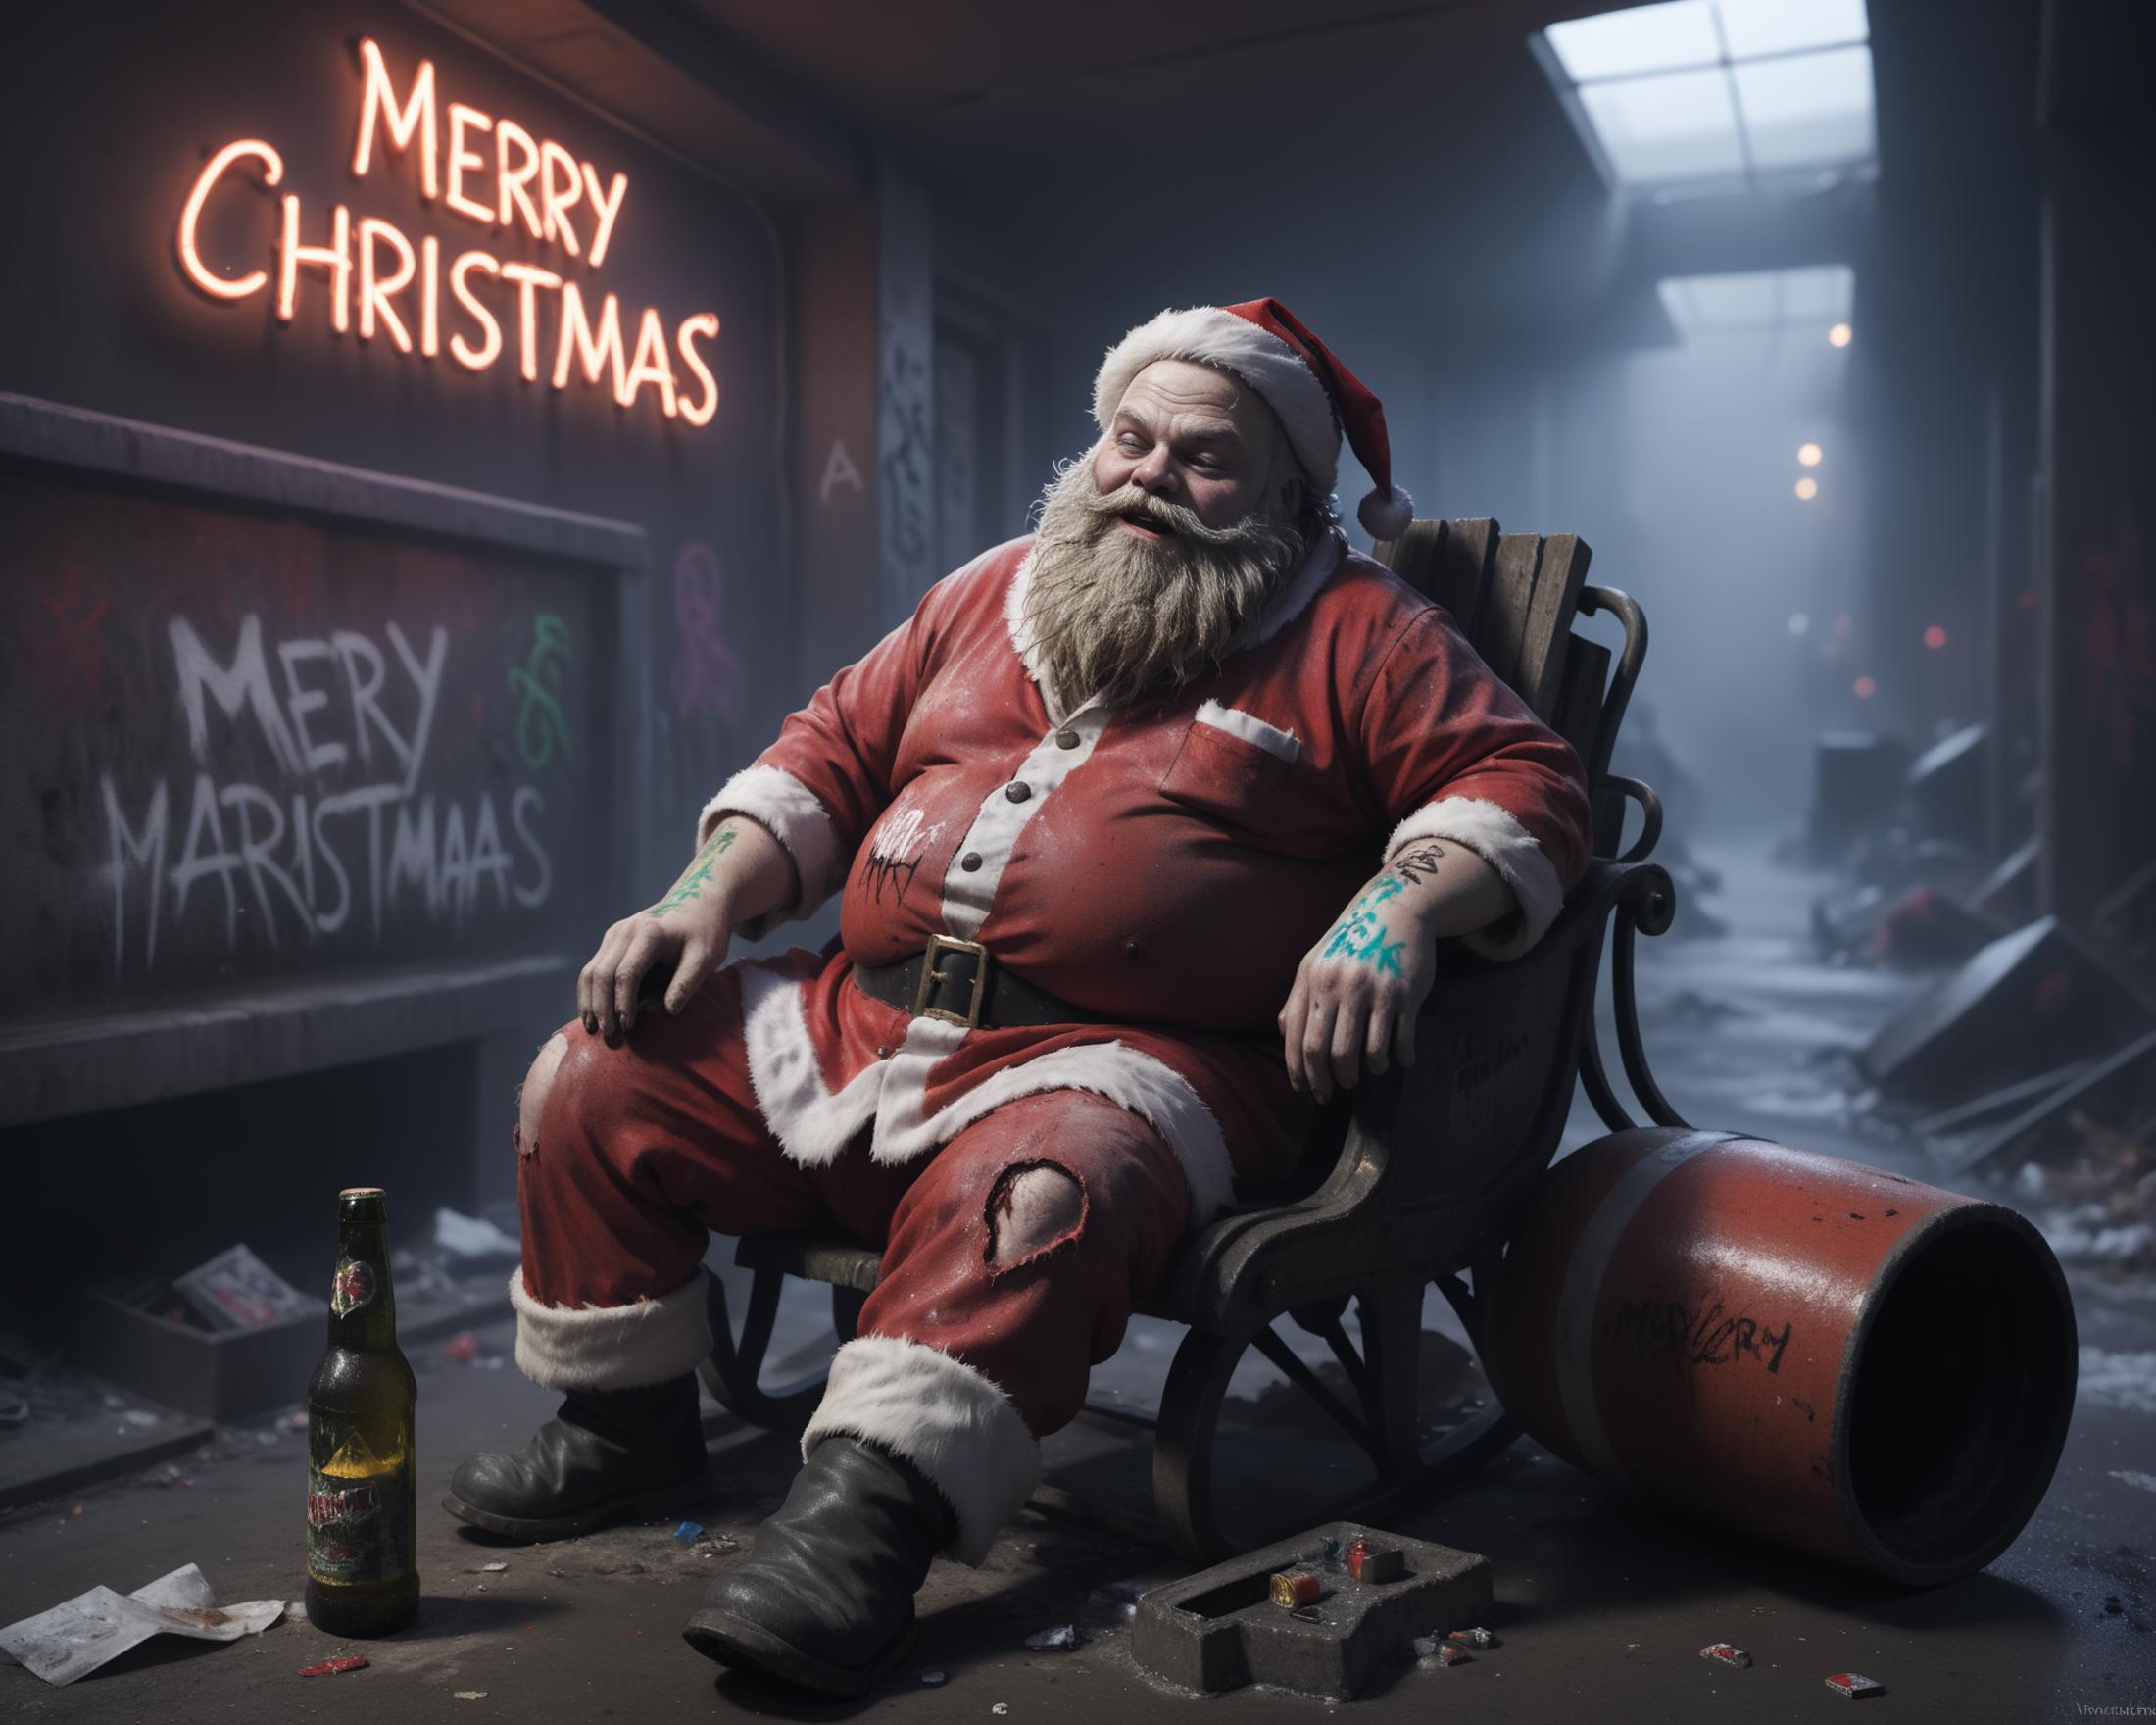 Santa Claus sitting on a wooden chair in a room with graffiti and a beer bottle nearby.